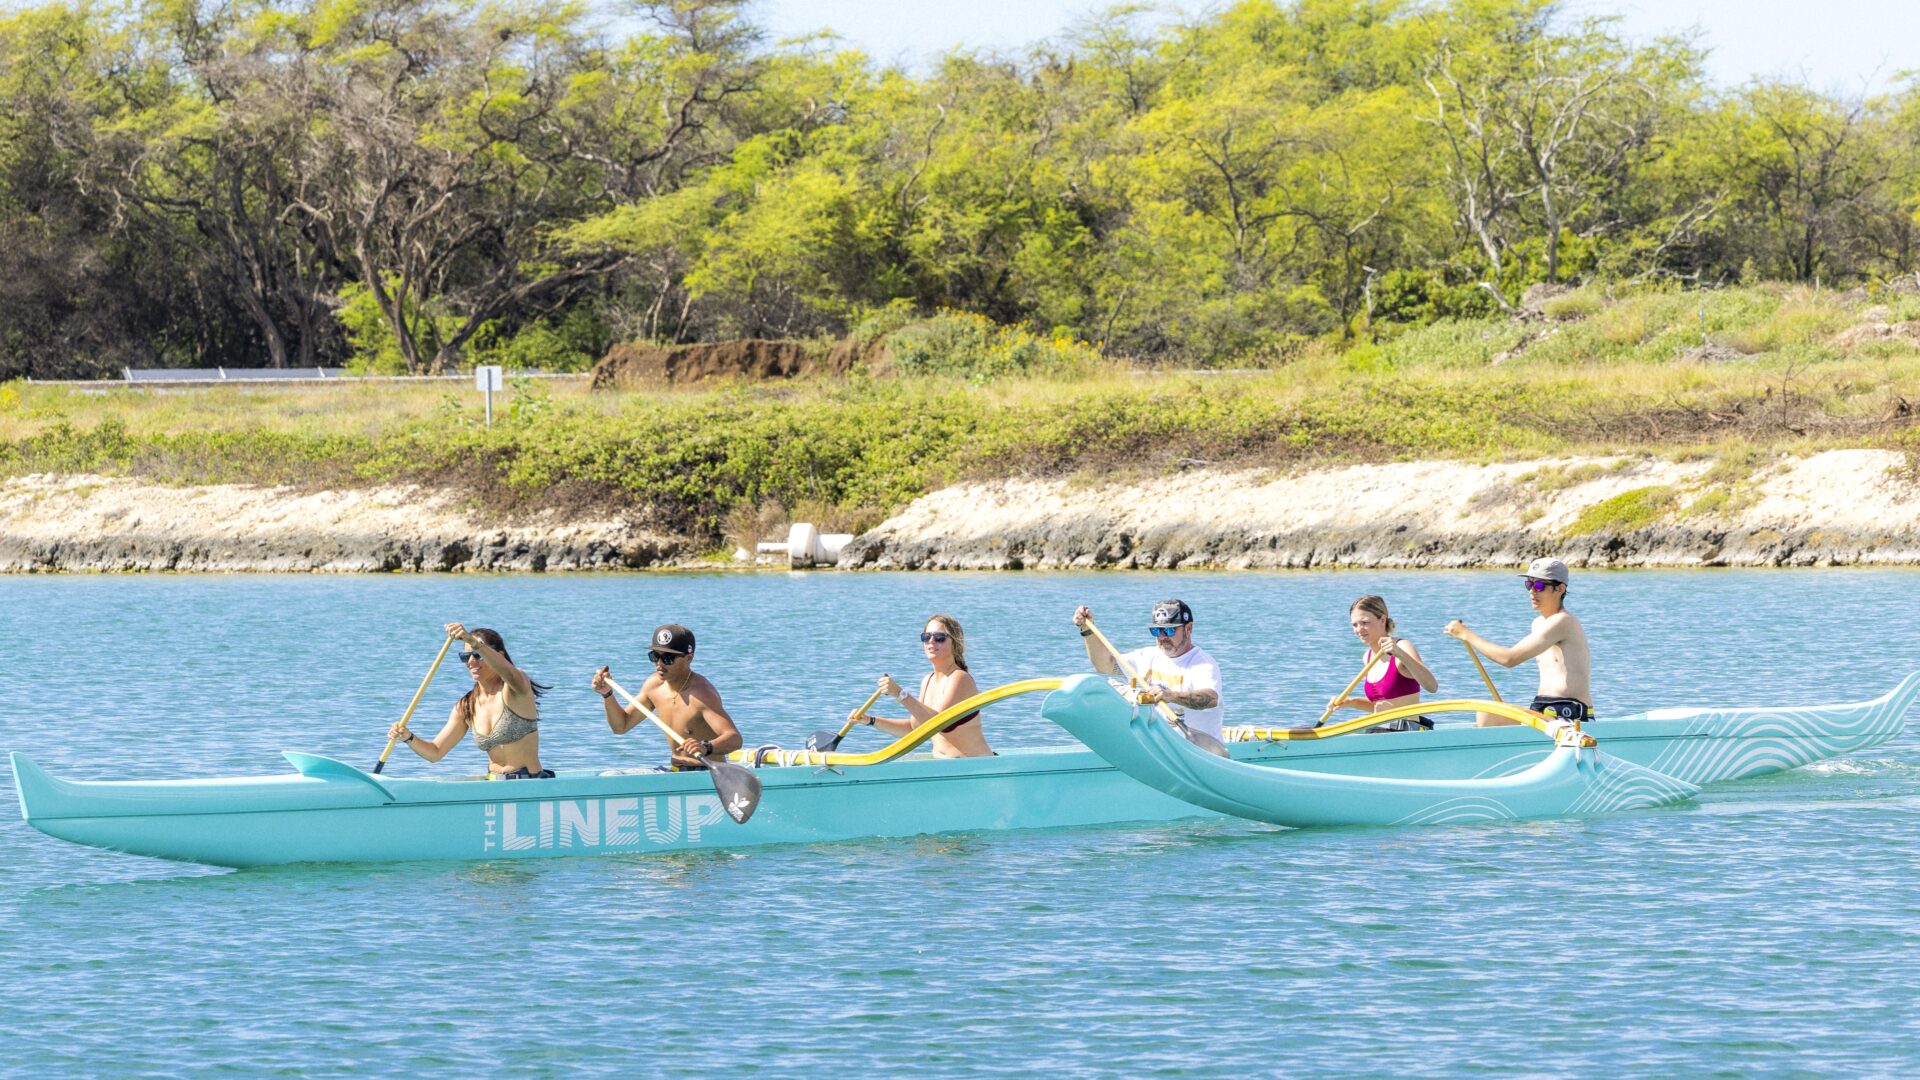 Outrigger canoe guided tours on the Wai Kai Lagoon at The LineUp